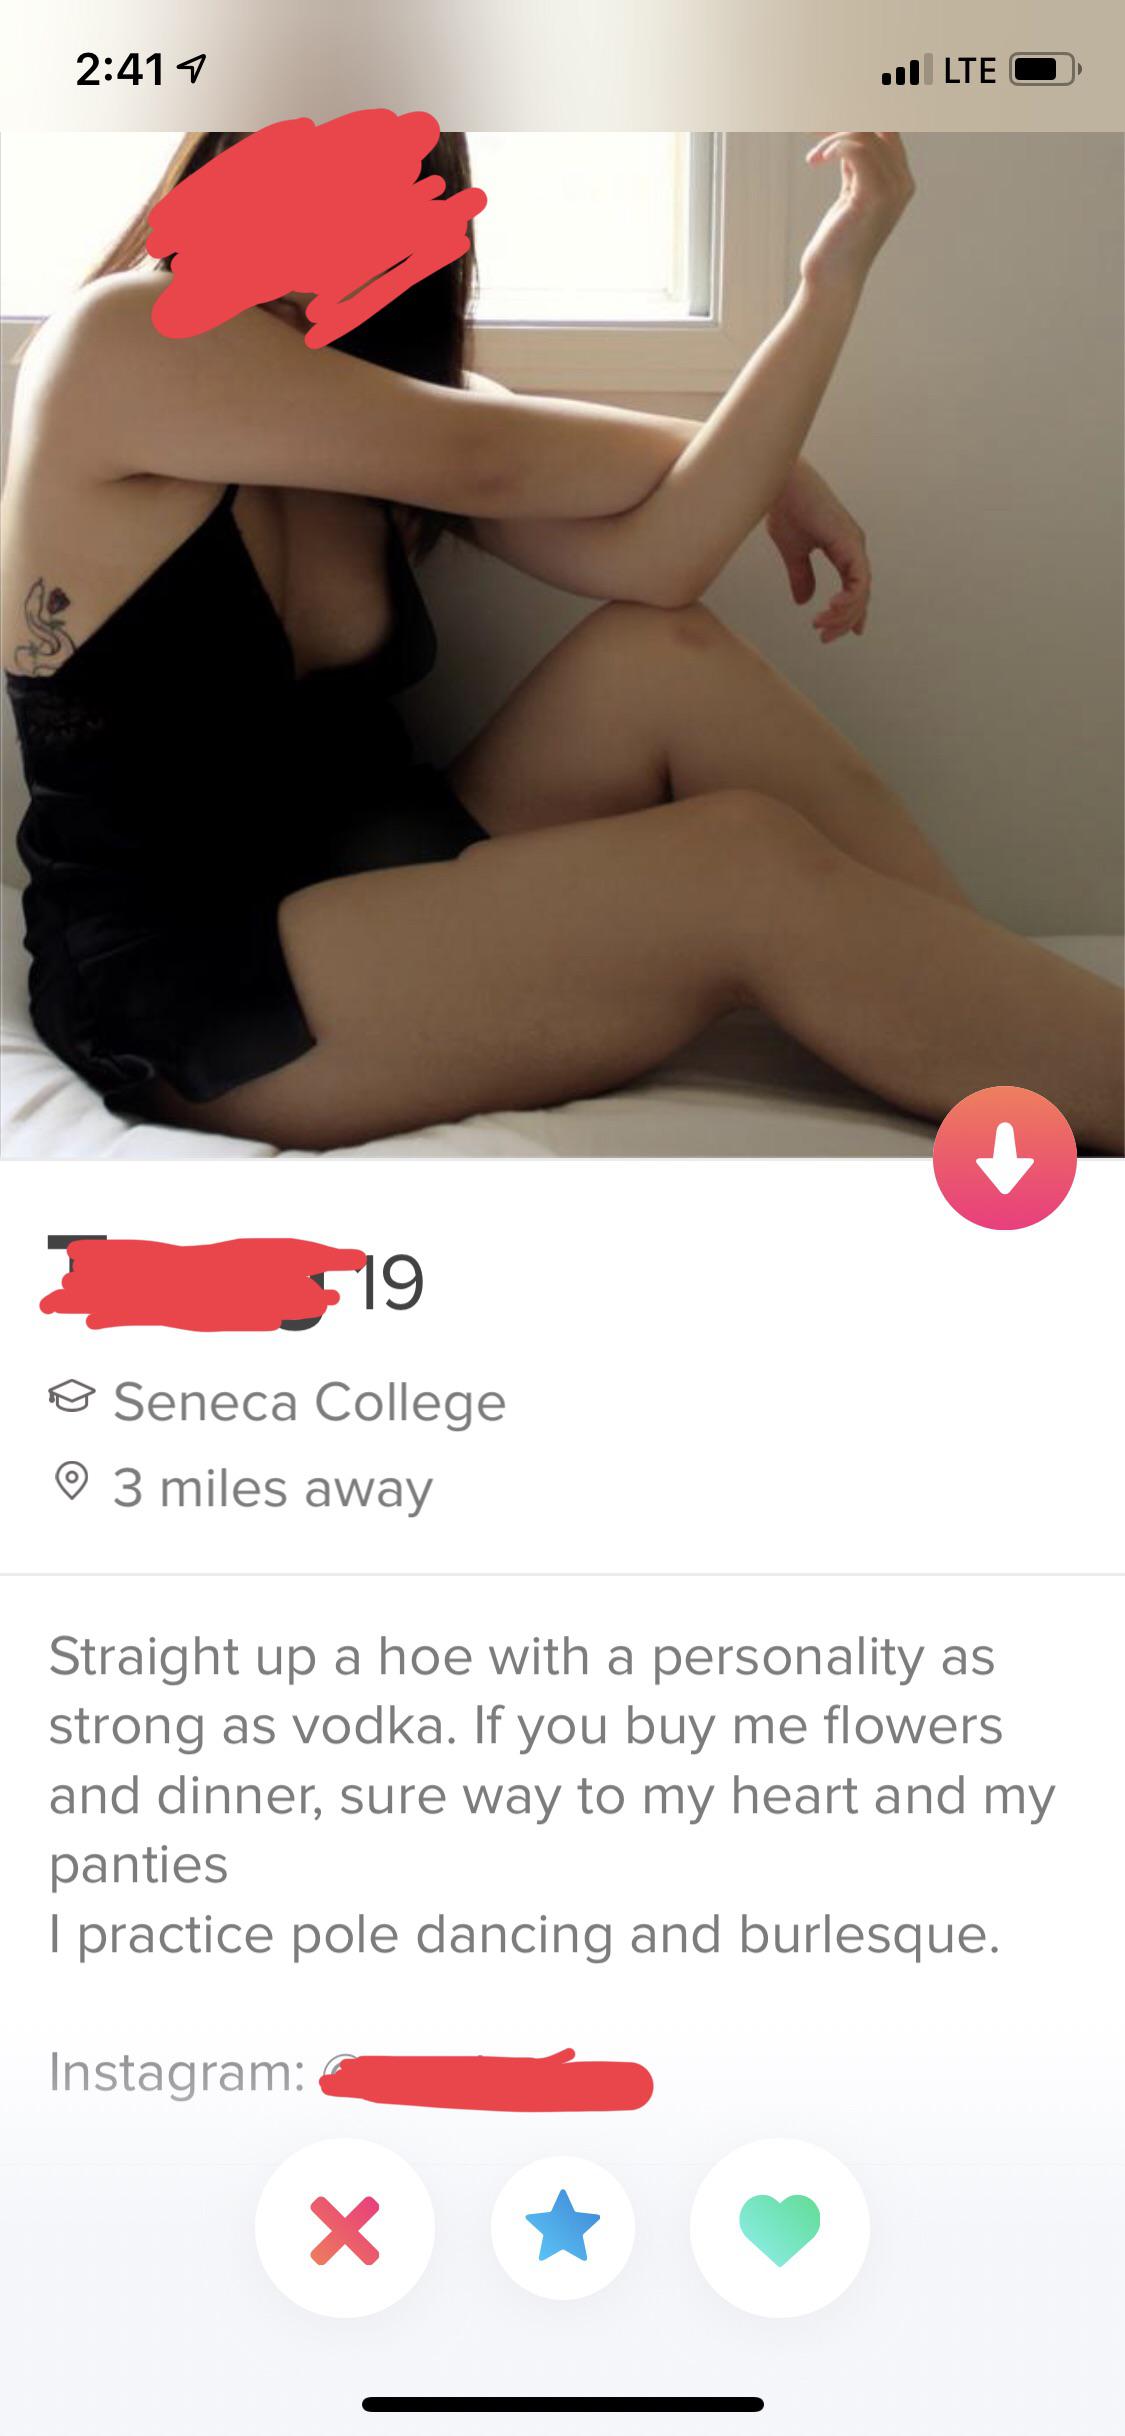 Funny tinder profile - shoulder - @ Seneca College 3 miles away Straight up a hoe with a personality as strong as vodka. If you buy me flowers and dinner, sure way to my heart and my panties I practice pole dancing and burlesque Instagram